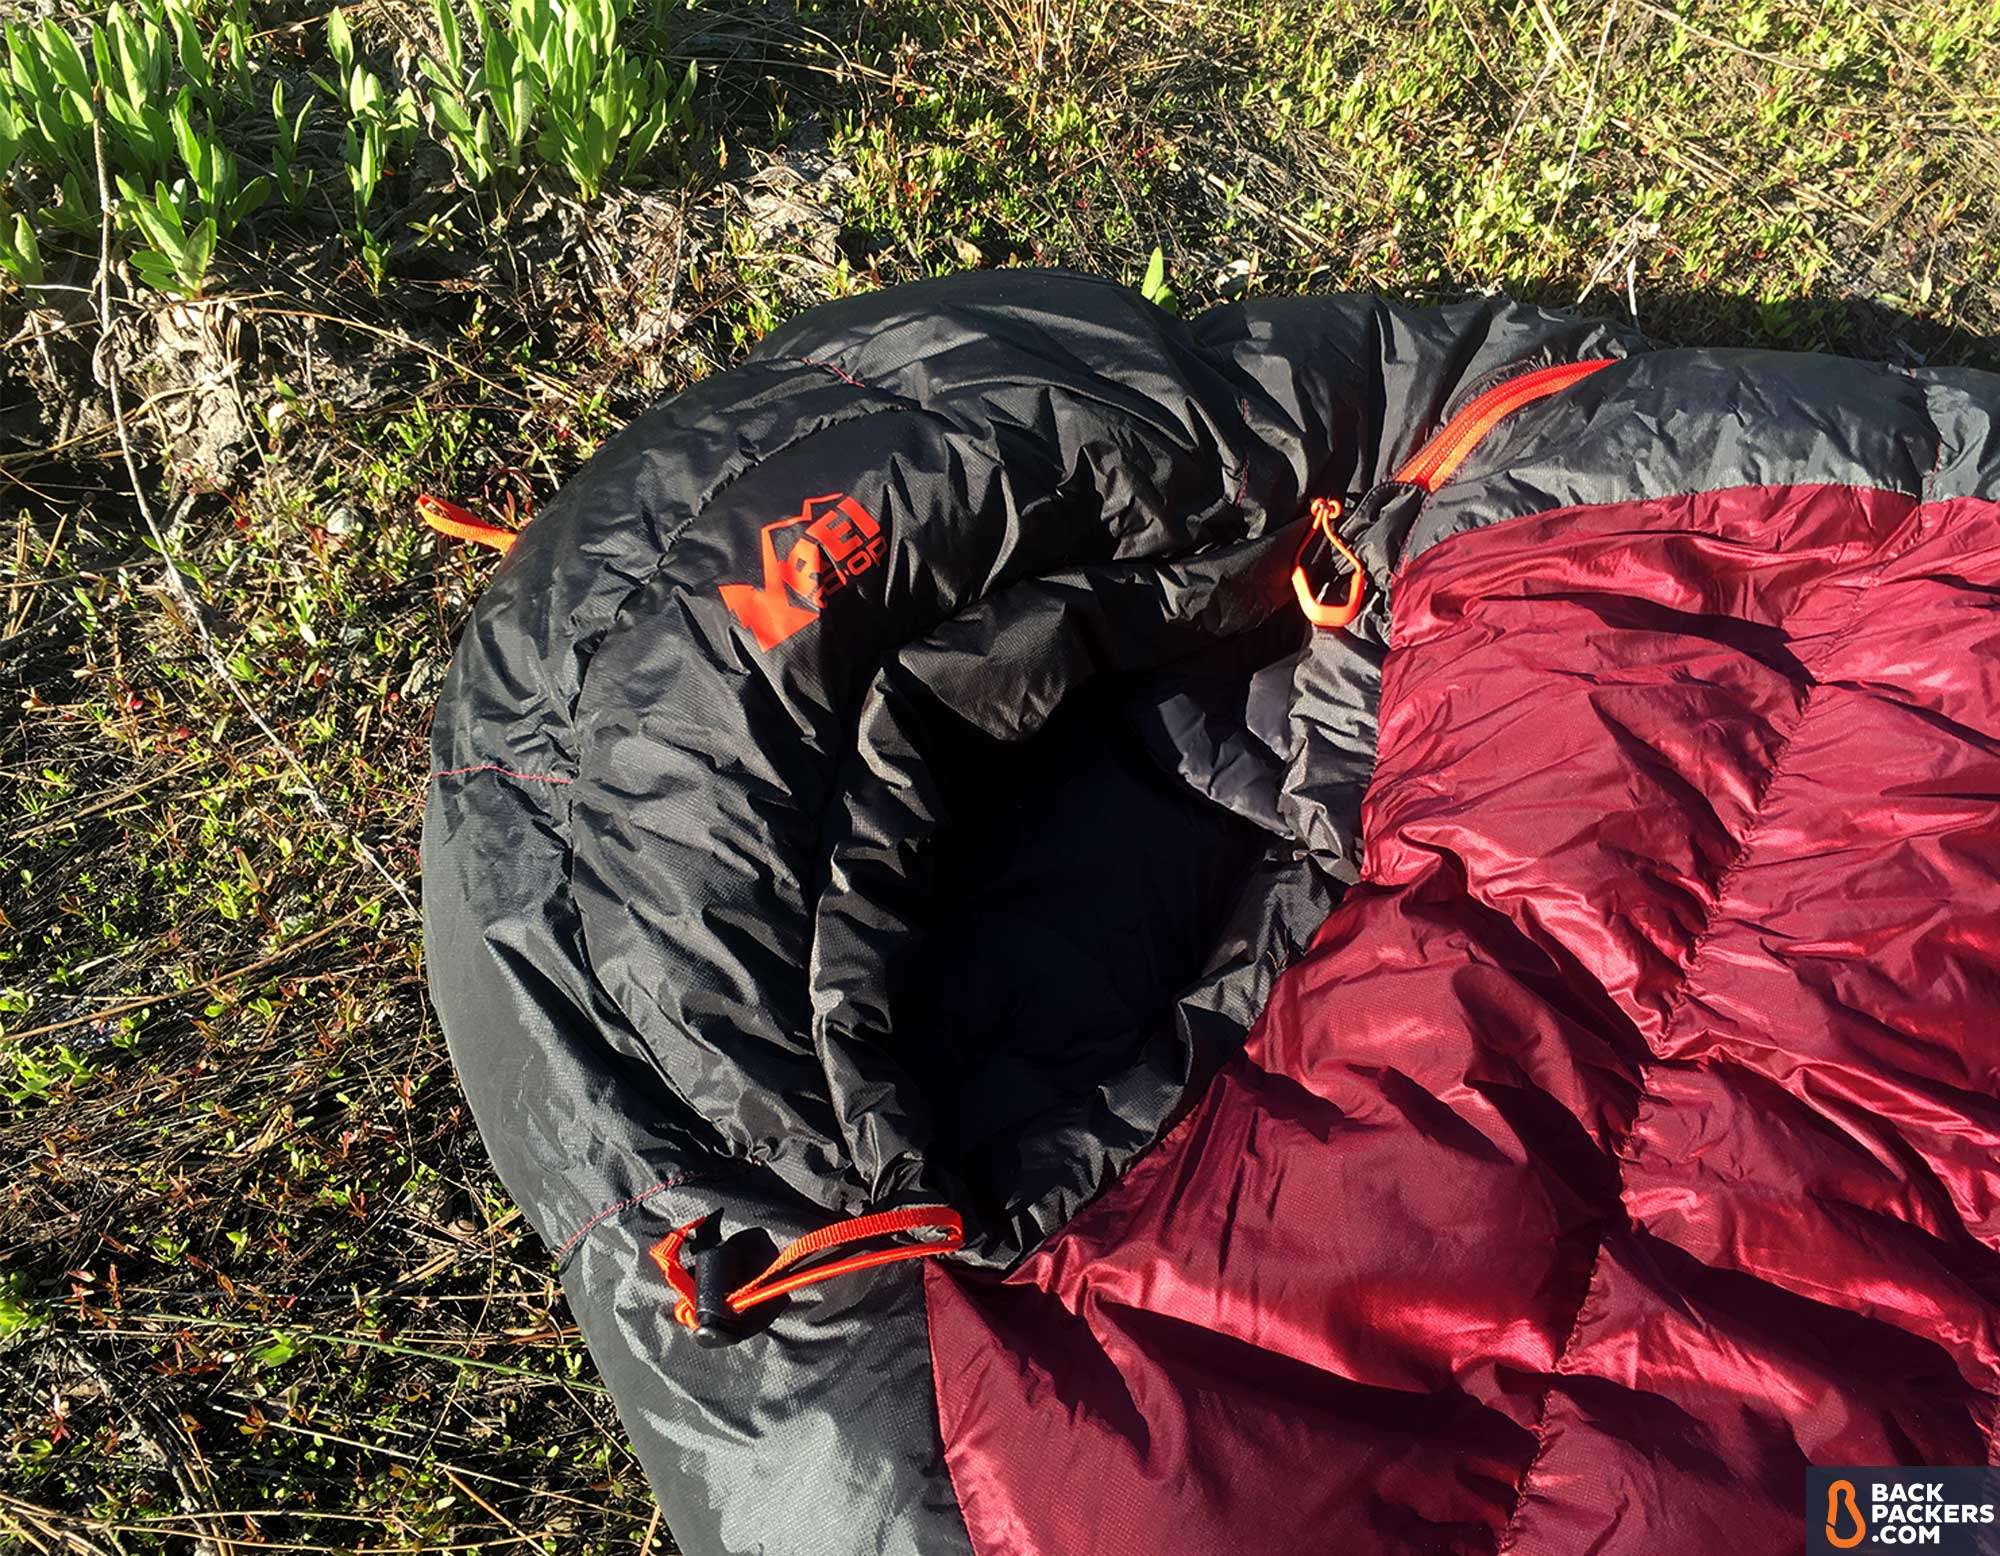 REI Igneo 17 Review 2018 | Sleeping Bag Review | Backpackers.com